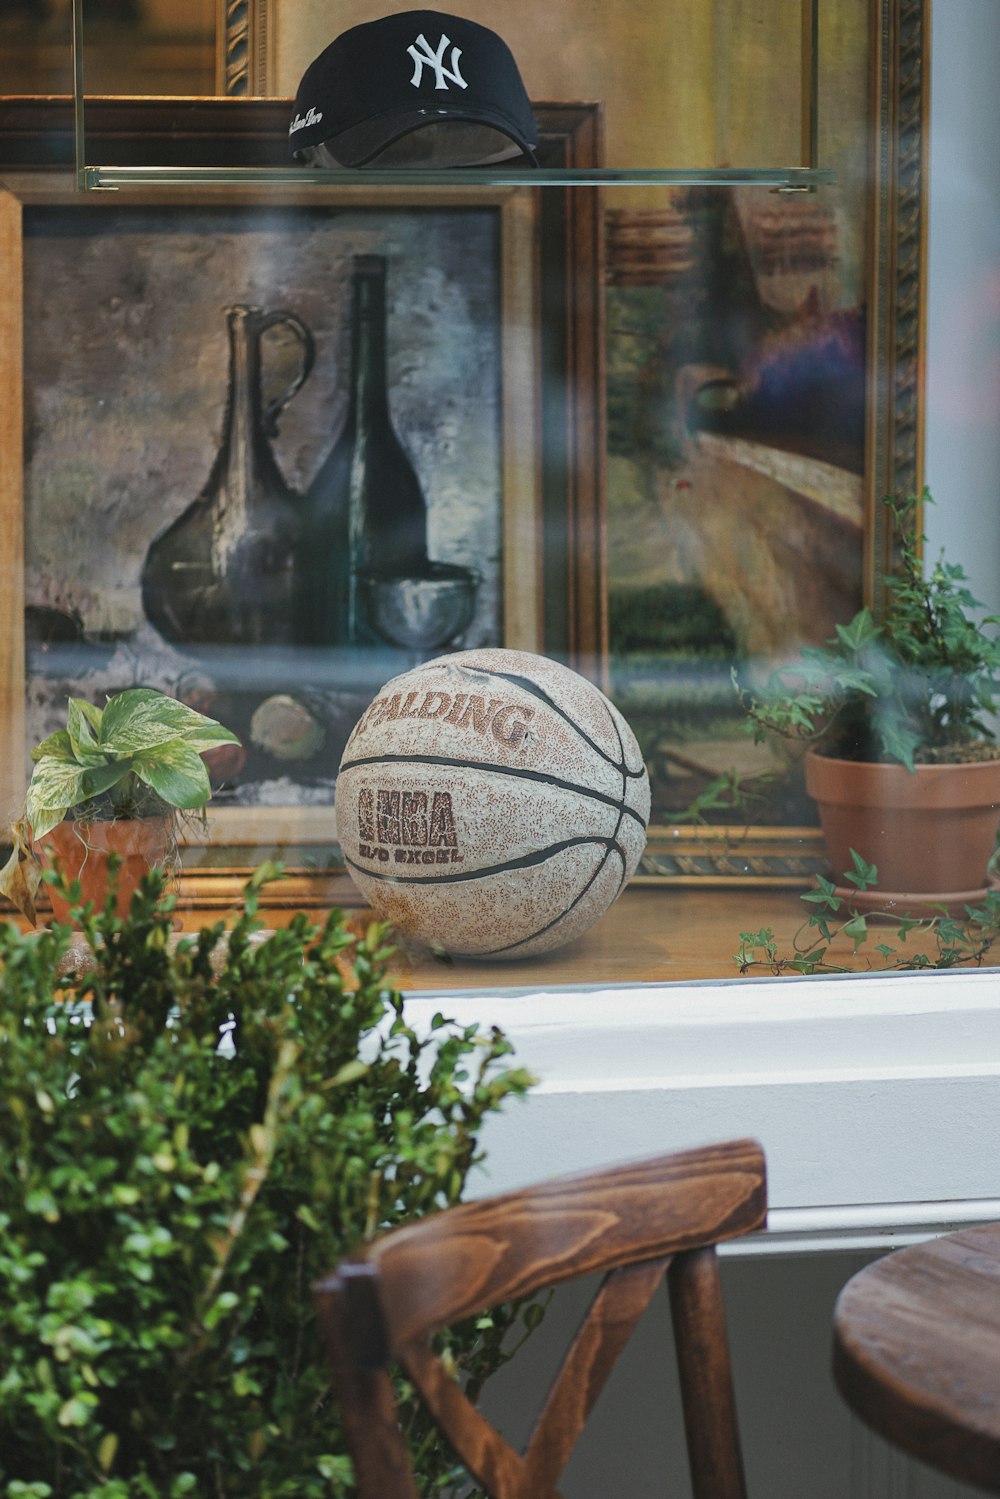 a basketball sitting on top of a window sill